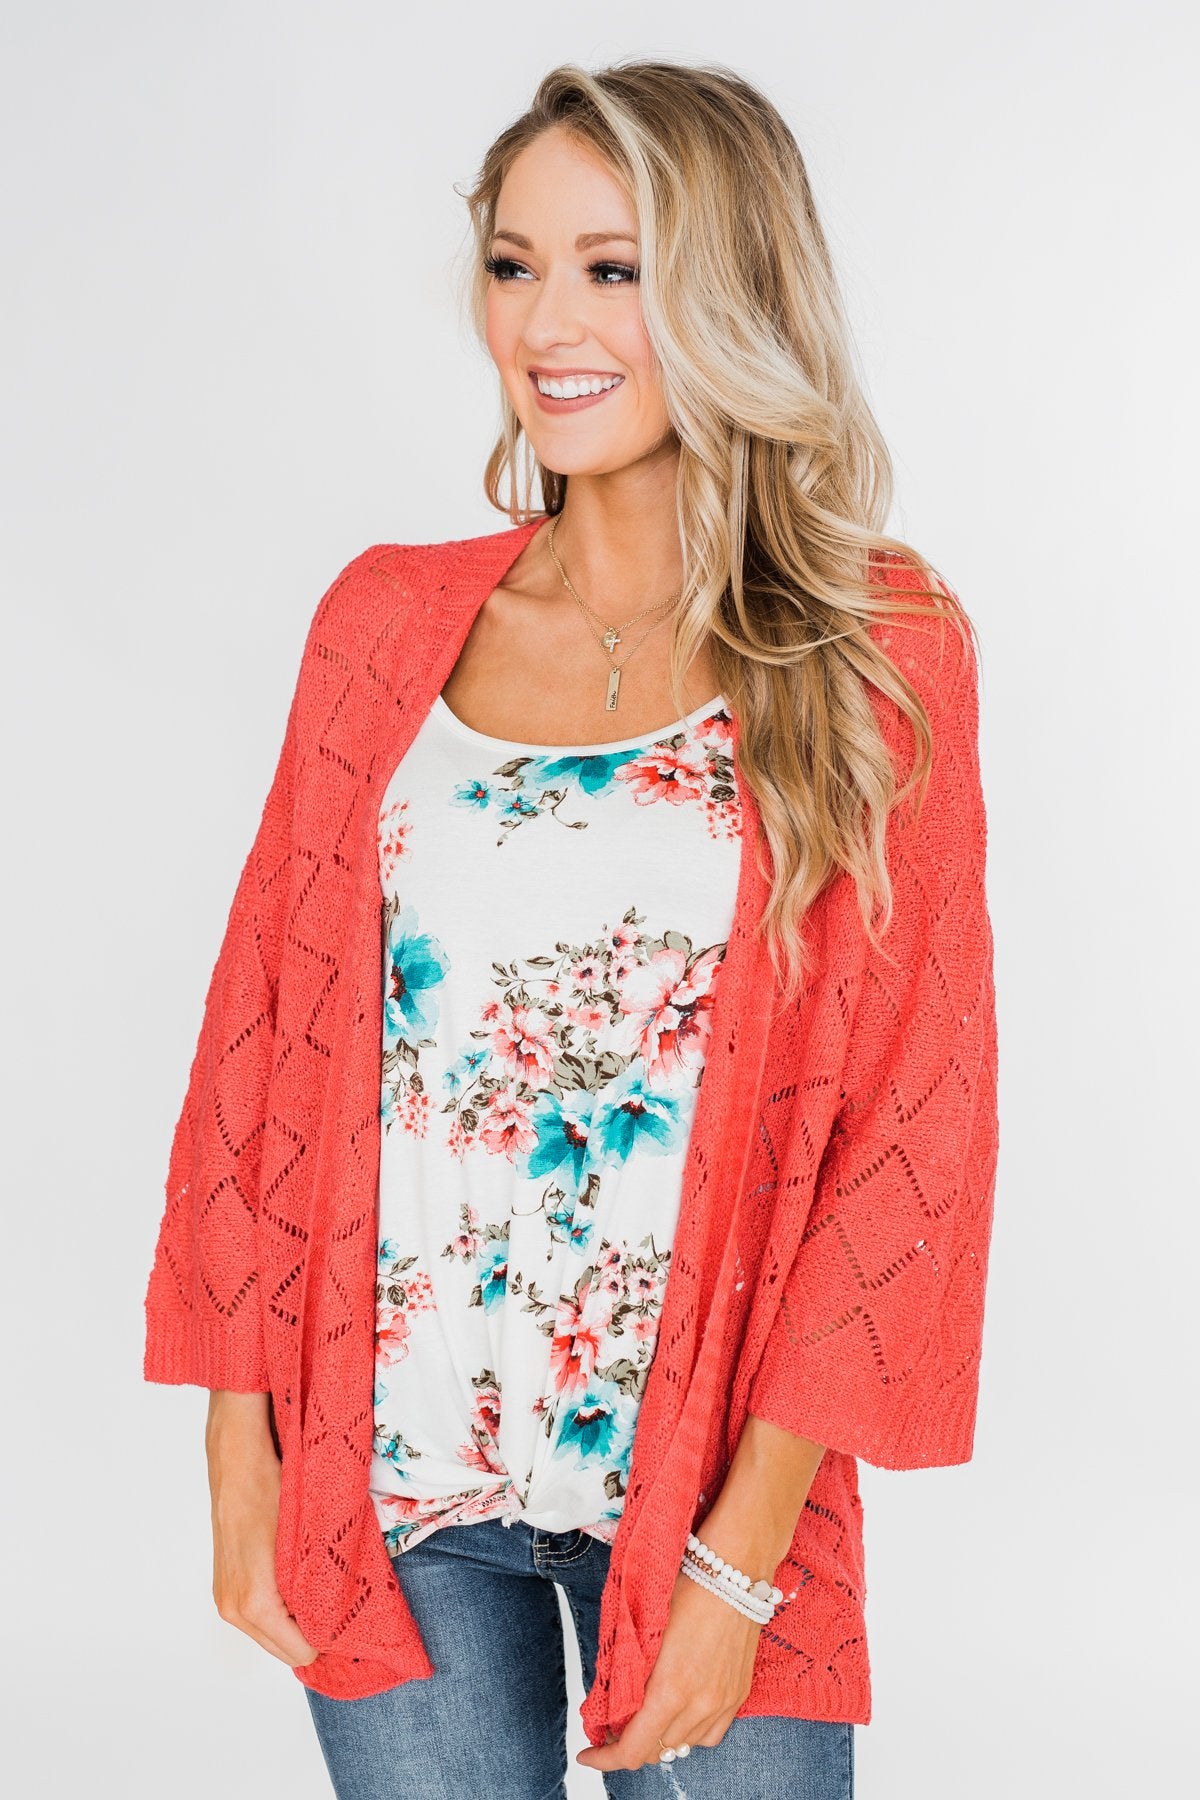 Pointtelle 3/4 Sleeve Cardigan- Coral